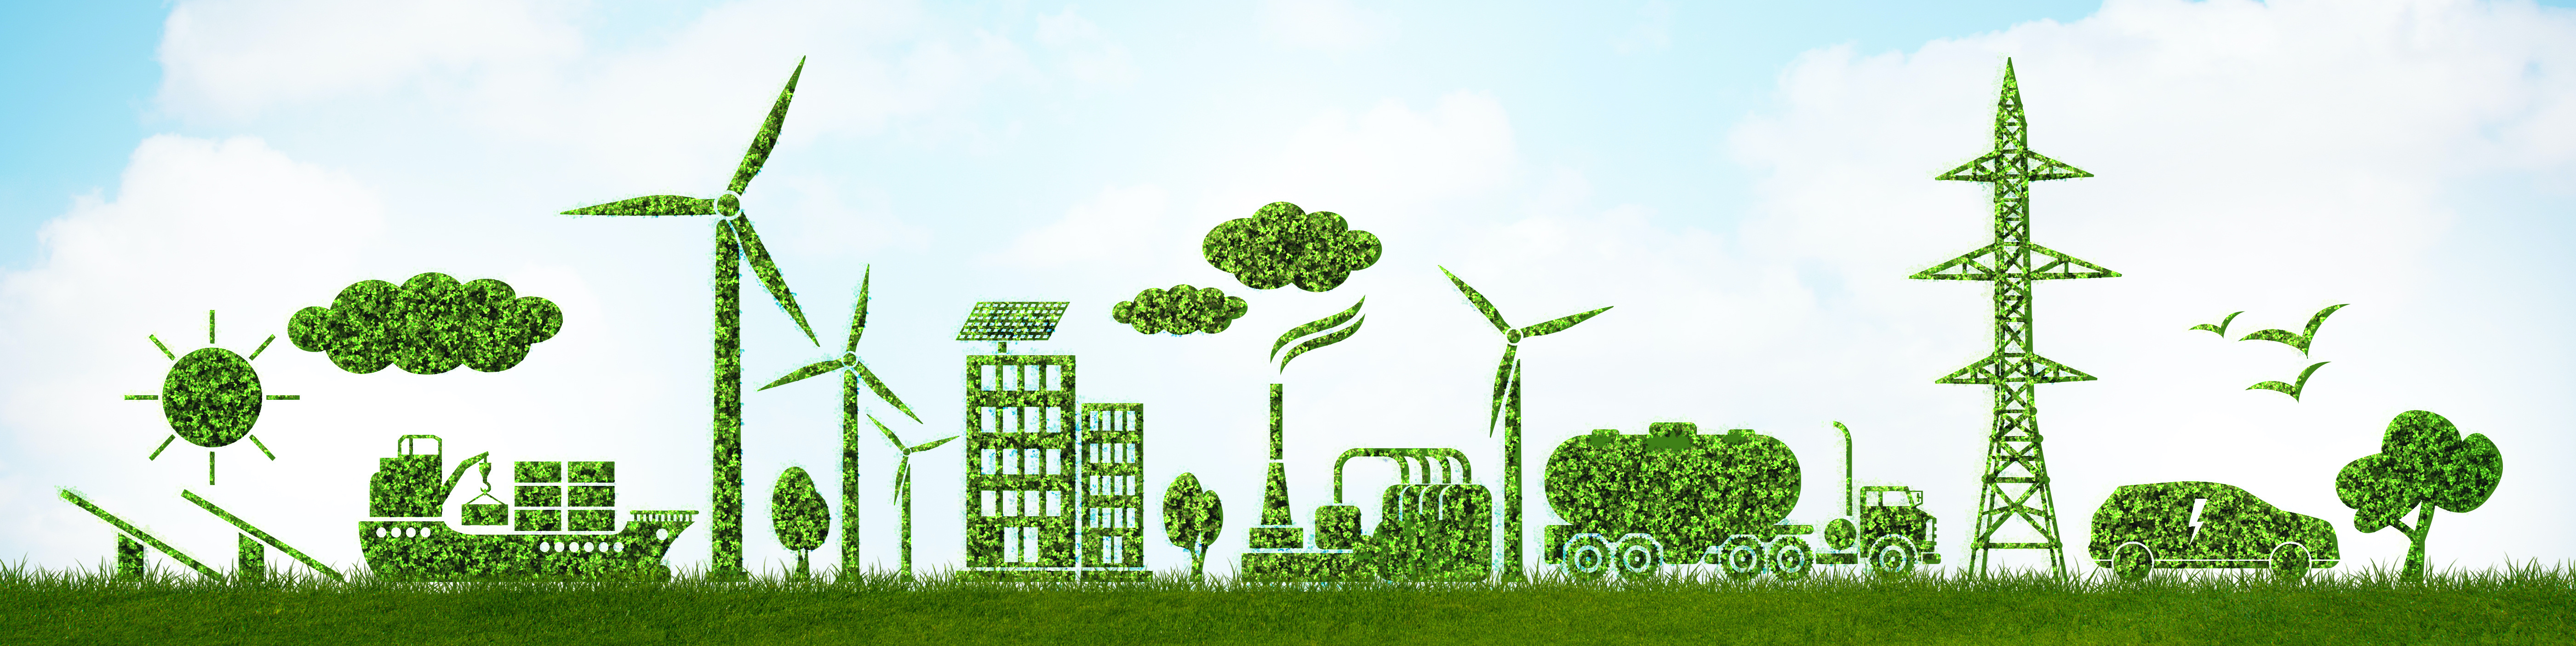 Illustration graphic of green energy made of grass, including solar panels, cargo ship, wind turbines, buildings, factories, a large lorry and an electricity tower set against a blue sky filled with bright white clouds.